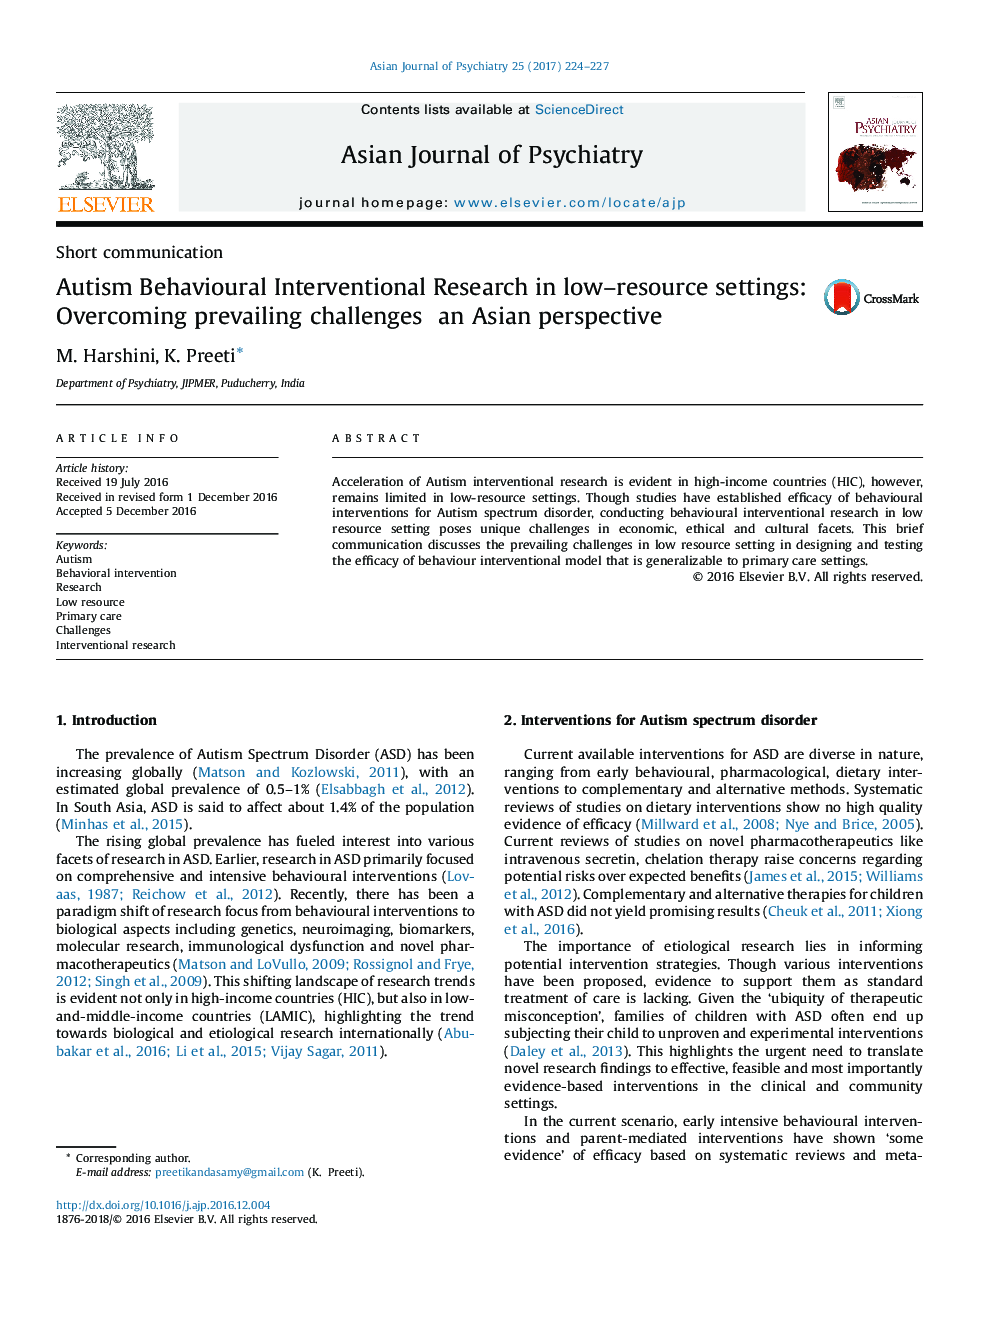 Autism Behavioural Interventional Research in low-resource settings: Overcoming prevailing challenges Â­ an Asian perspective